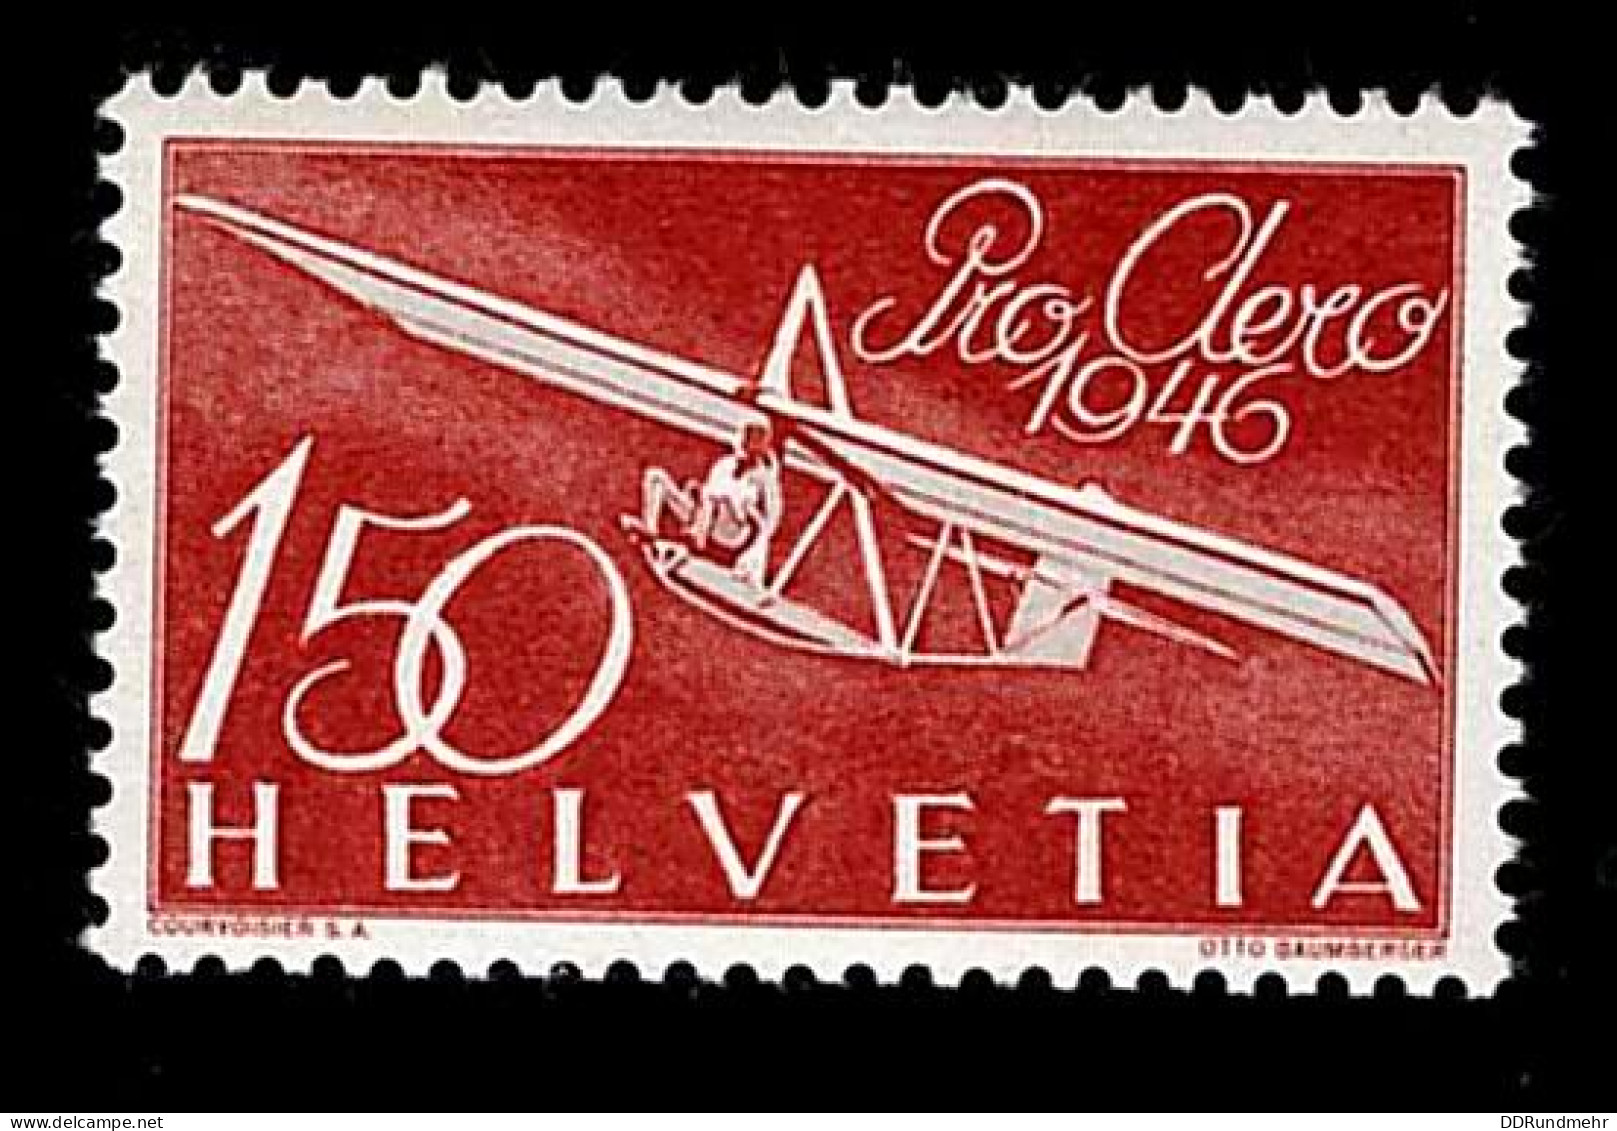 1946 Pro Aero  Michel CH 470 Stamp Number CH C41 Yvert Et Tellier CH PA40 Stanley Gibbons CH 466 Unificato CH A40 Xx MNH - Ongebruikt